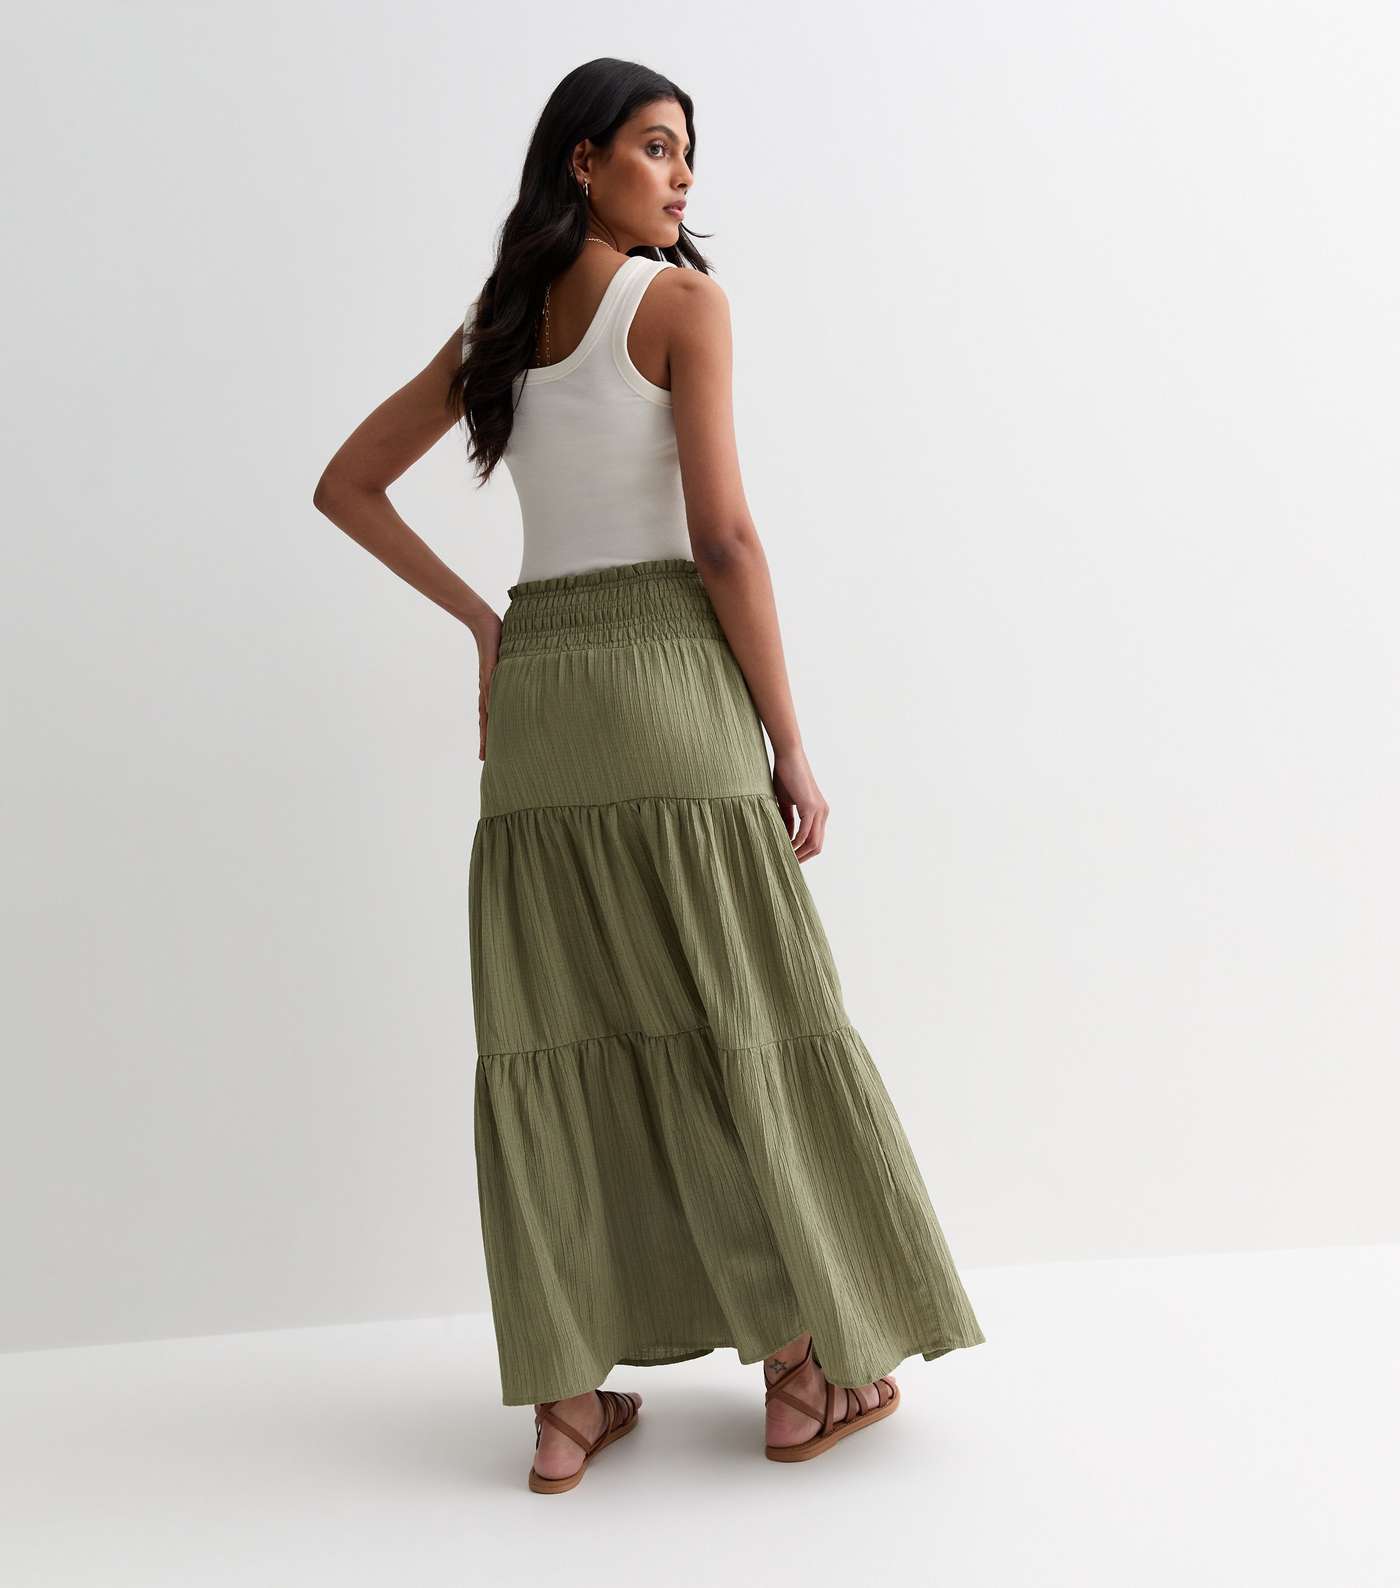 Gini London Olive Tiered Smock Maxi Skirt Image 4